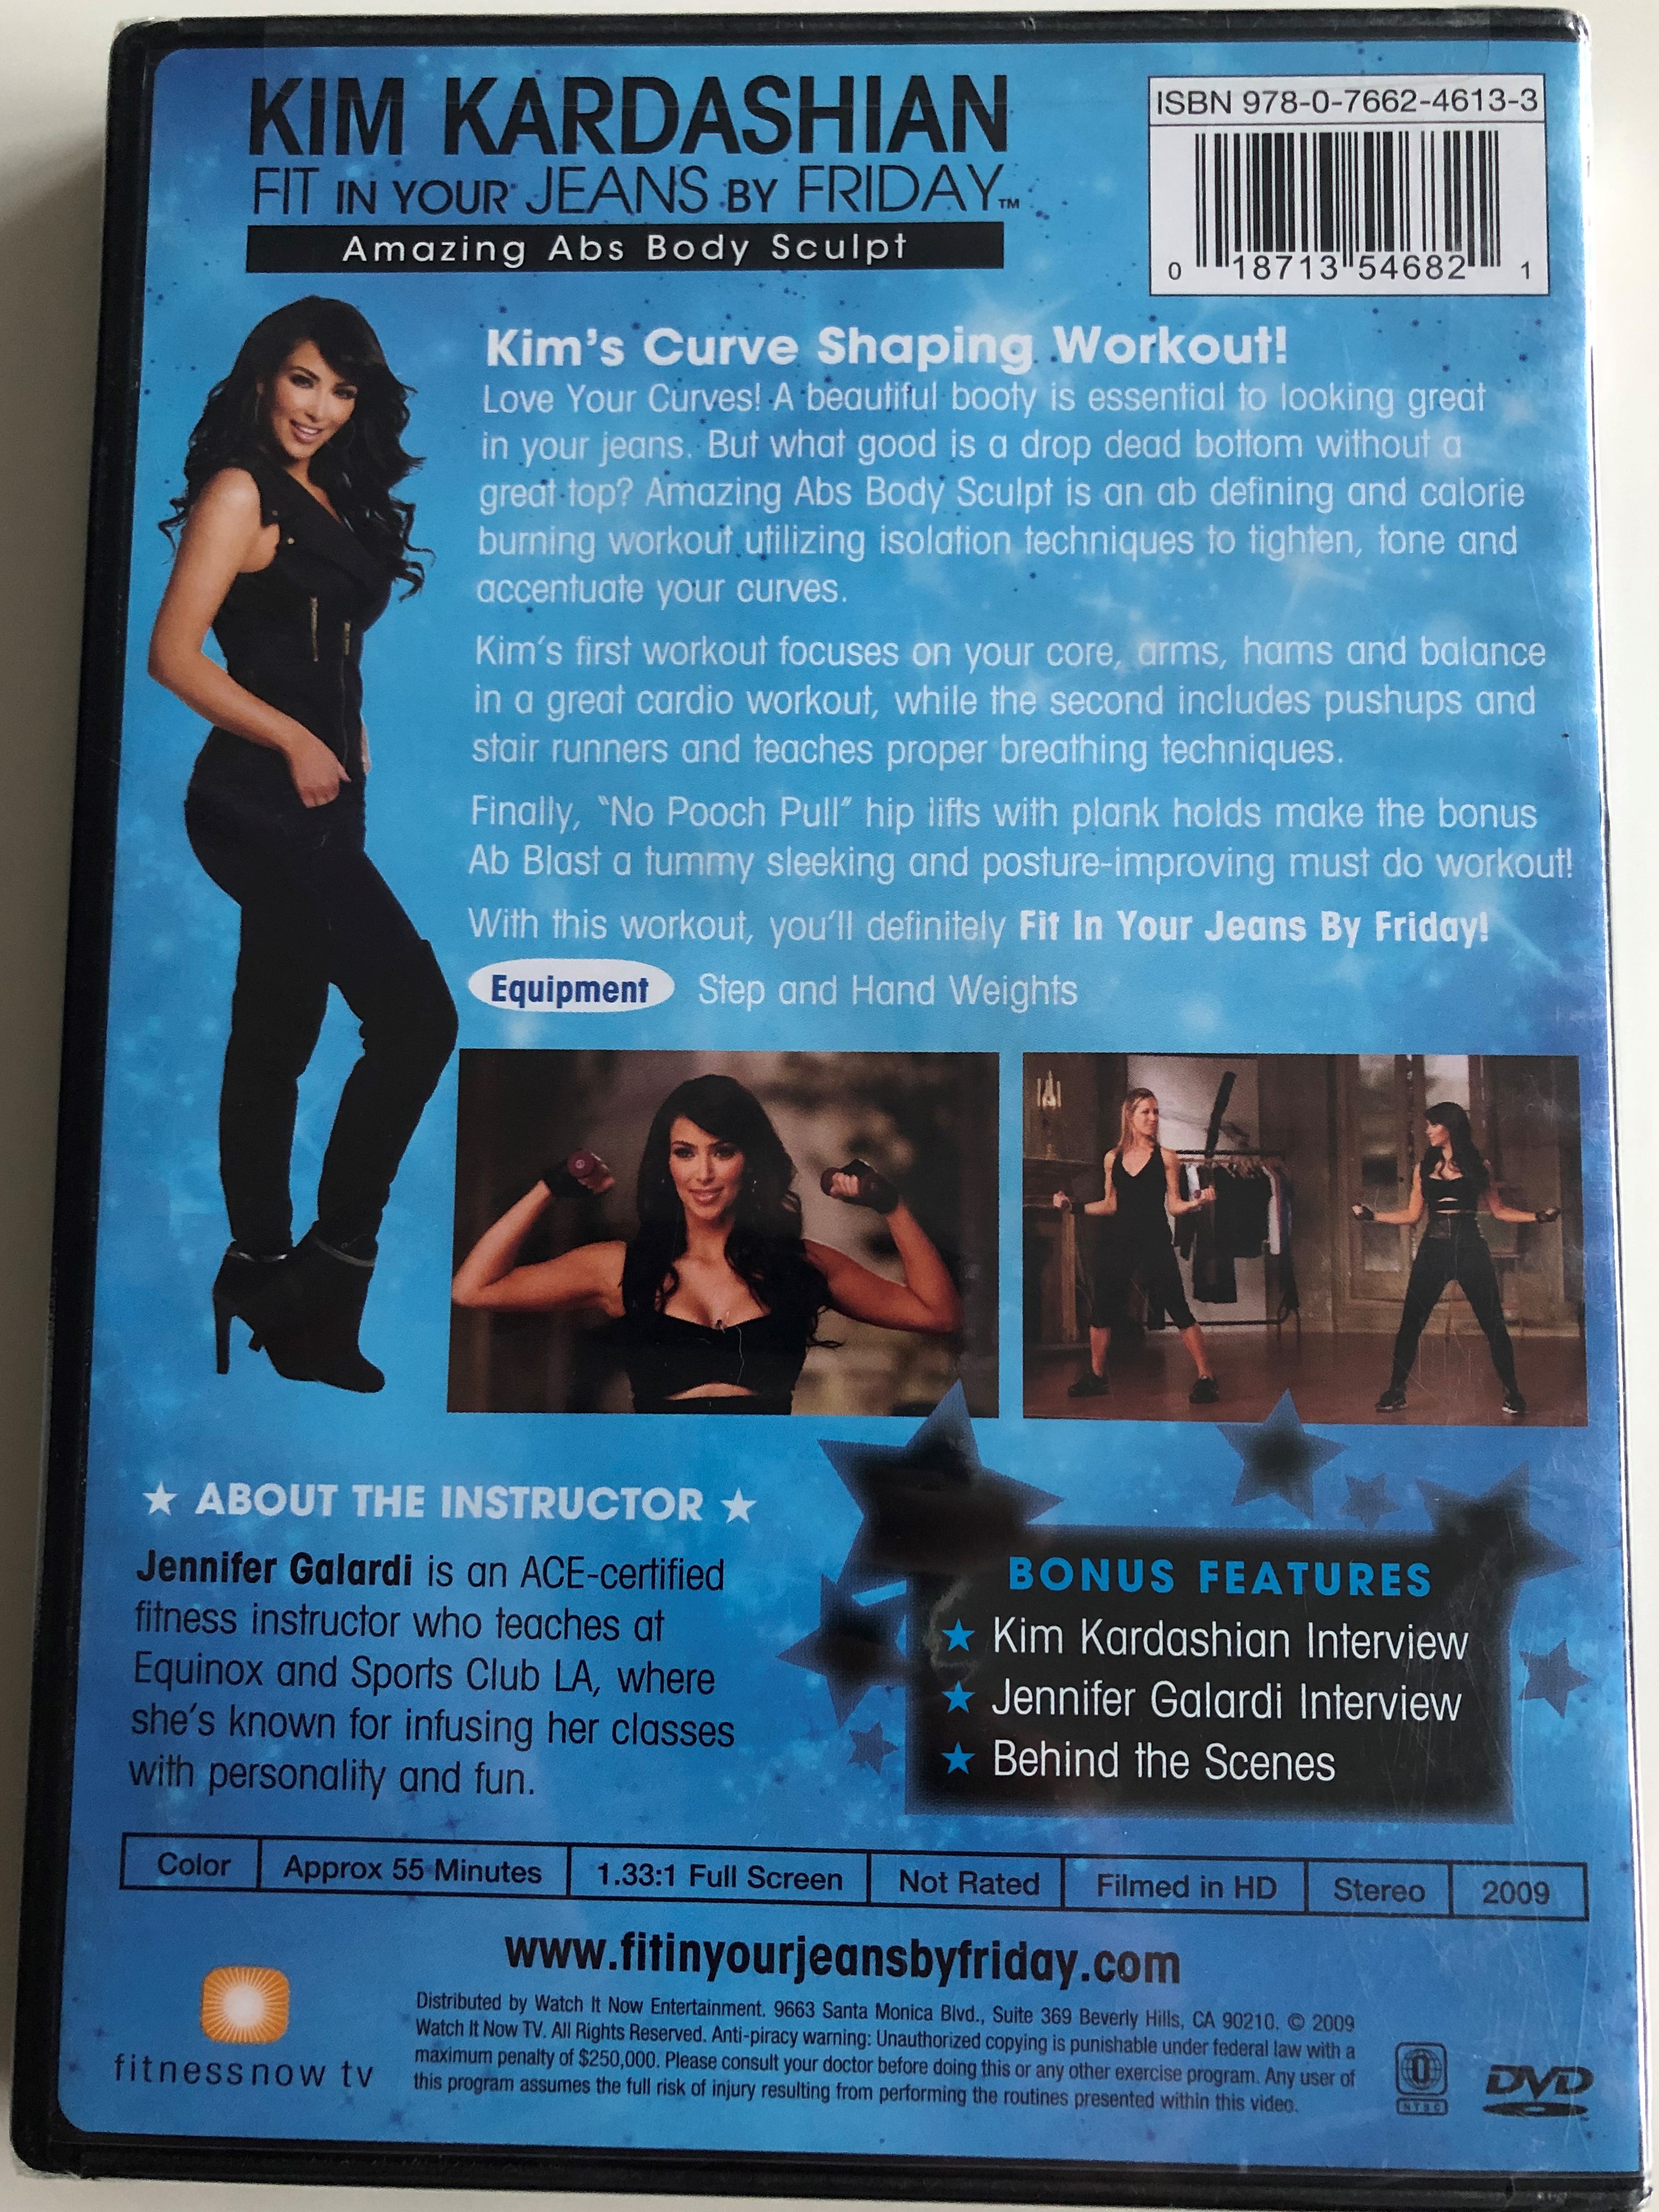 kim-kardashian-fit-in-your-jeans-by-friday-dvd-2009-2.jpg